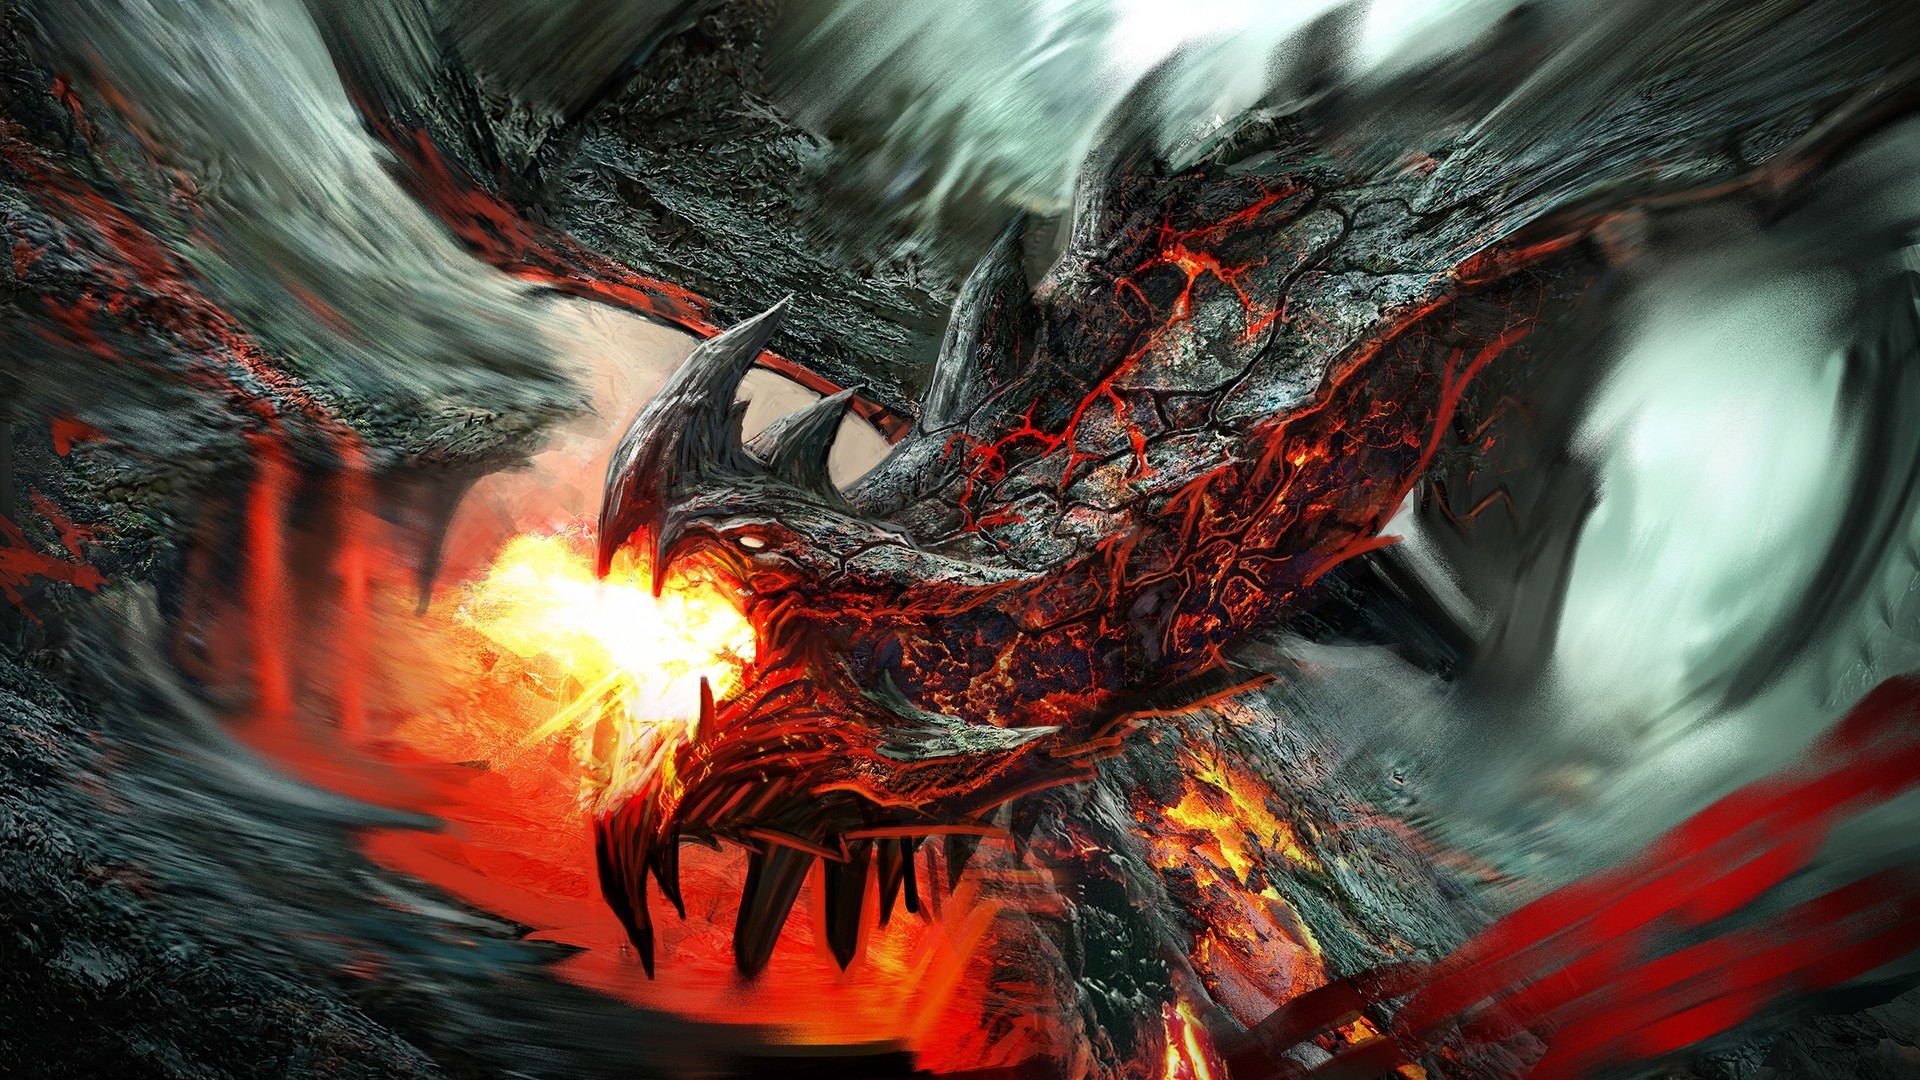 dragon fans out there I found these amazingly cool dragon wallpapers